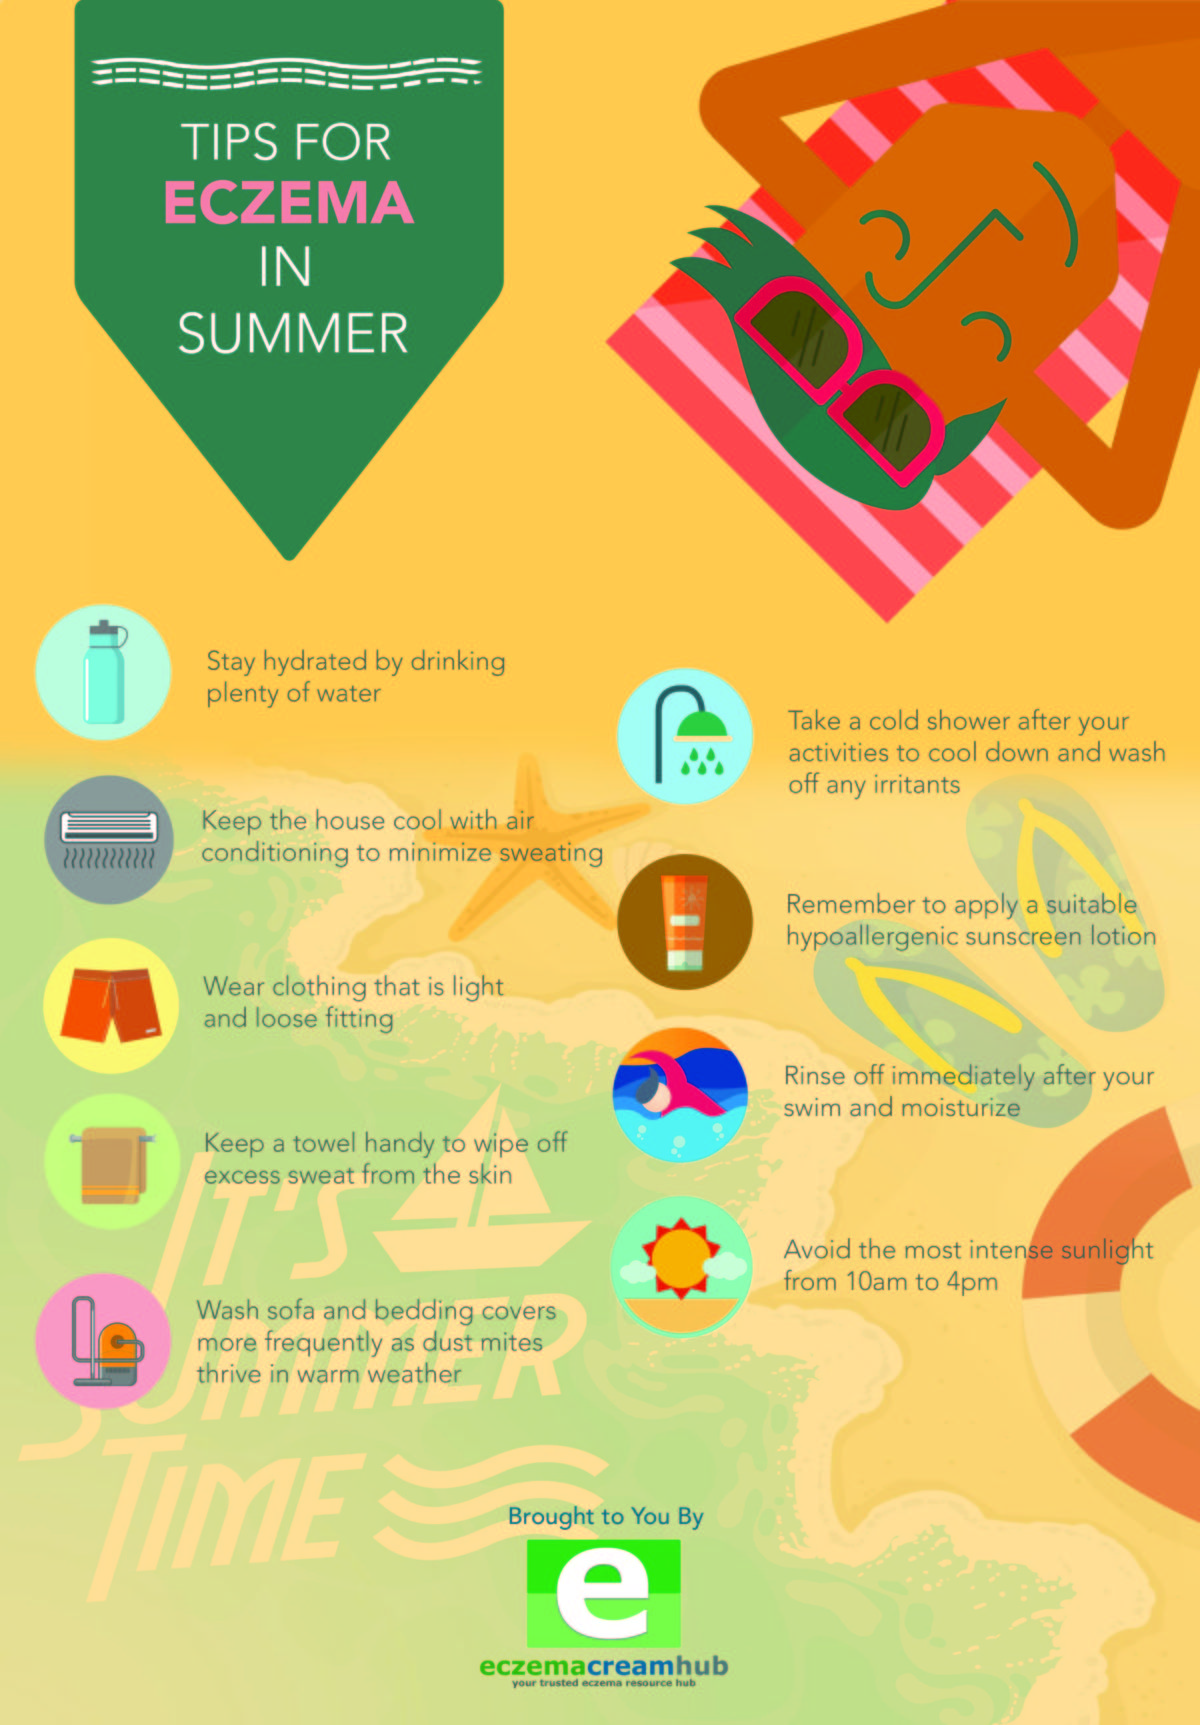 Tips for Eczema in Summer